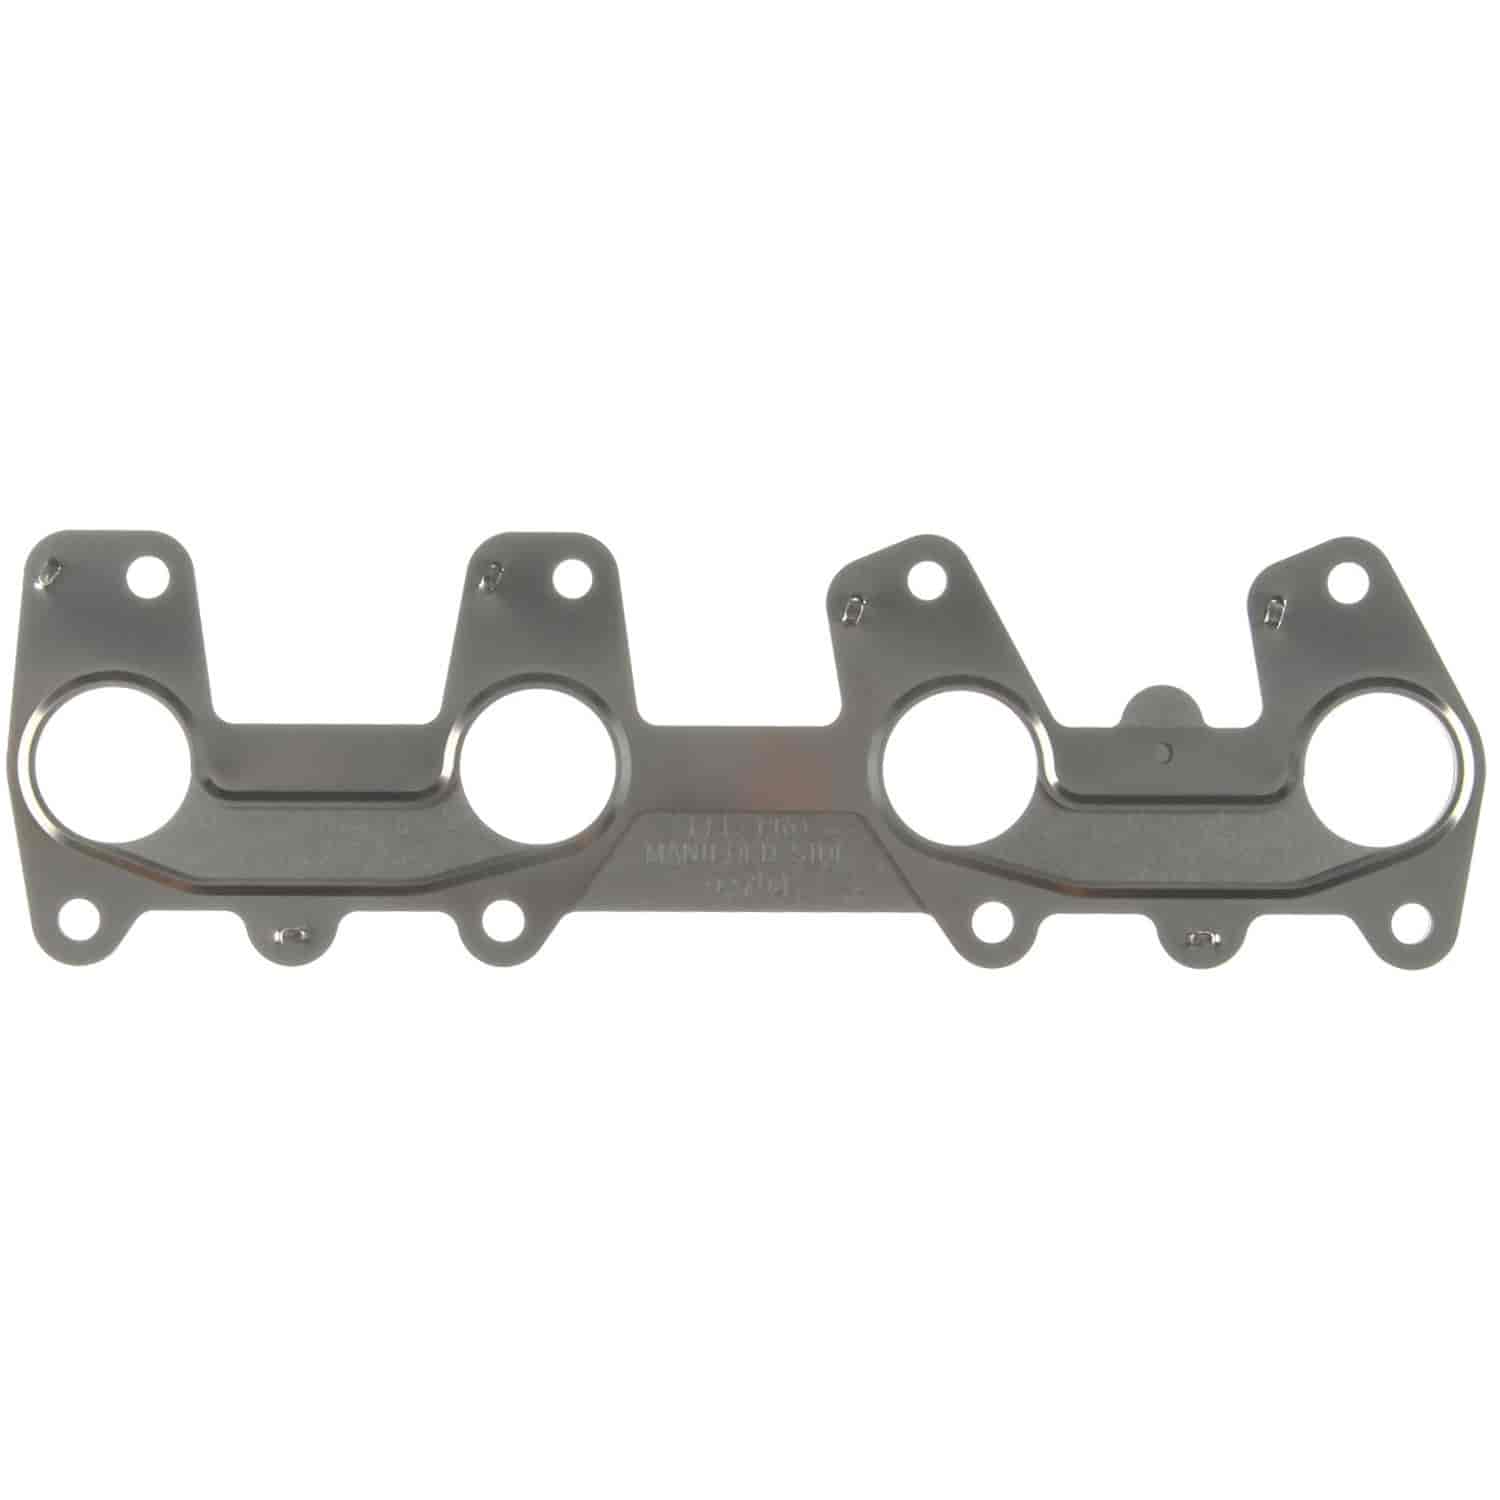 Exhaust Manifold Gasket 2000-2003 Chevy L4 2.2L (S-Series